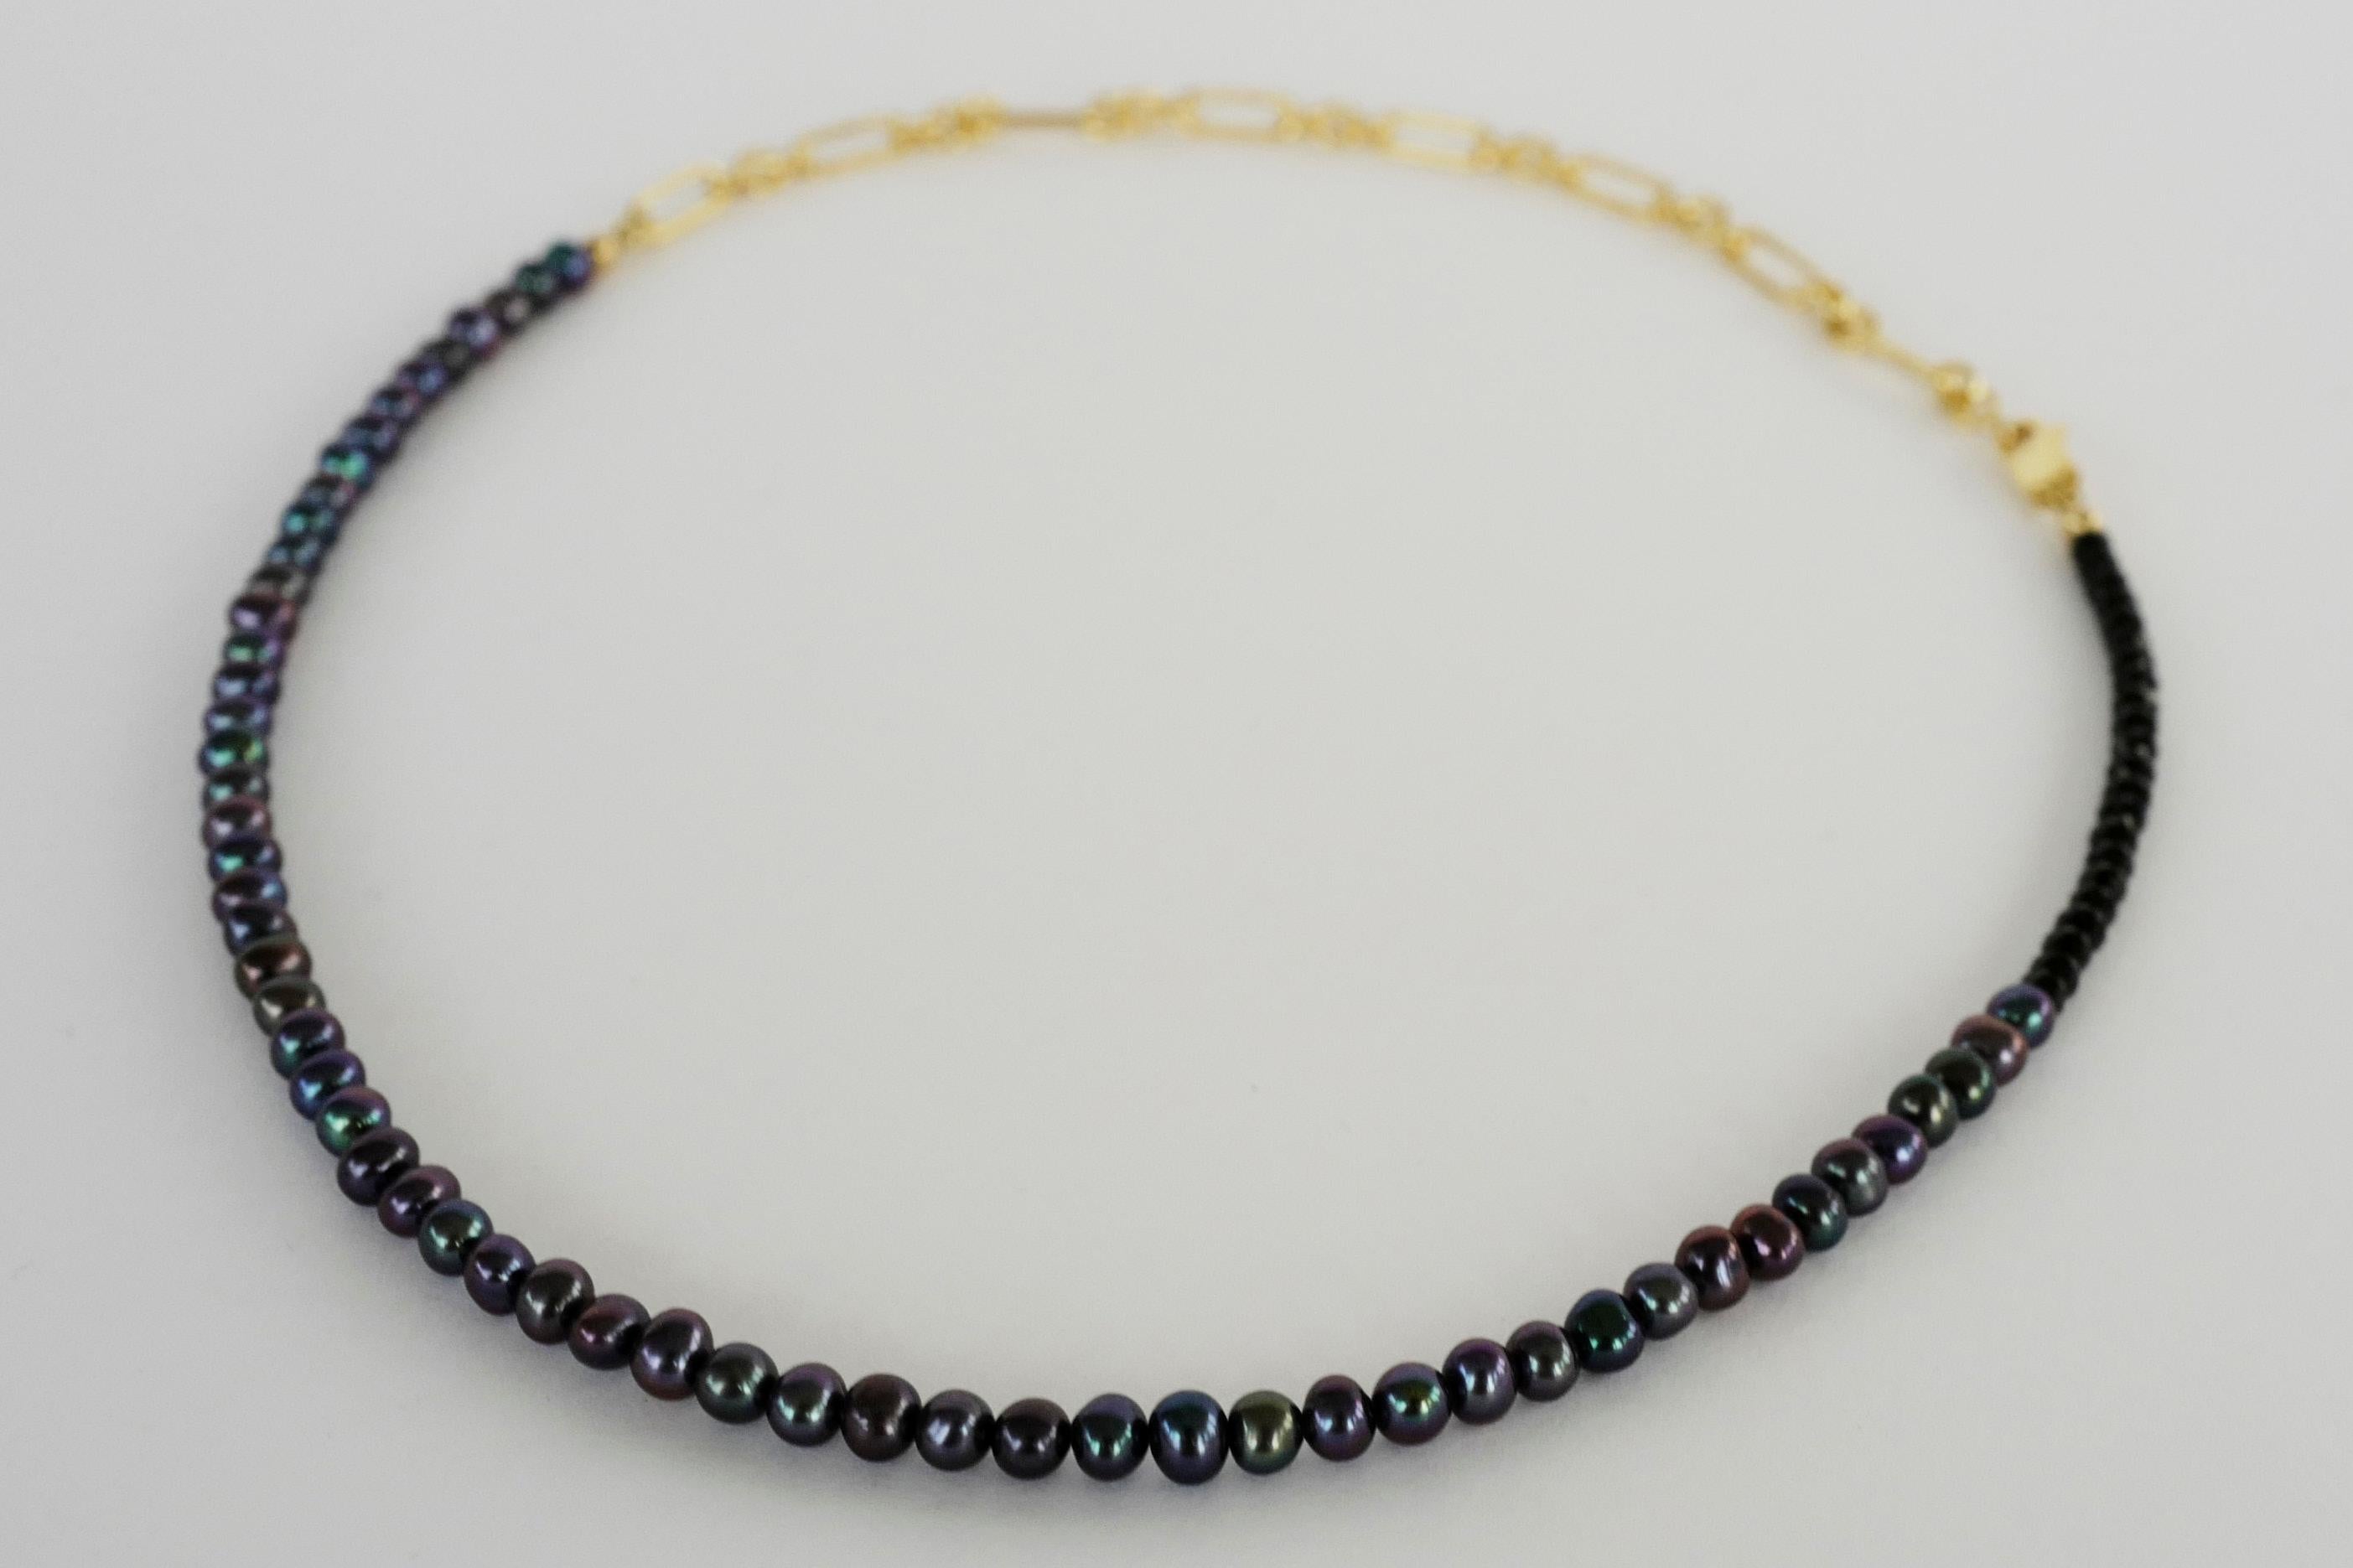 Romantic Black Pearl Beaded Choker Necklace Black Spinel Gold Filled Chain J Dauphin For Sale